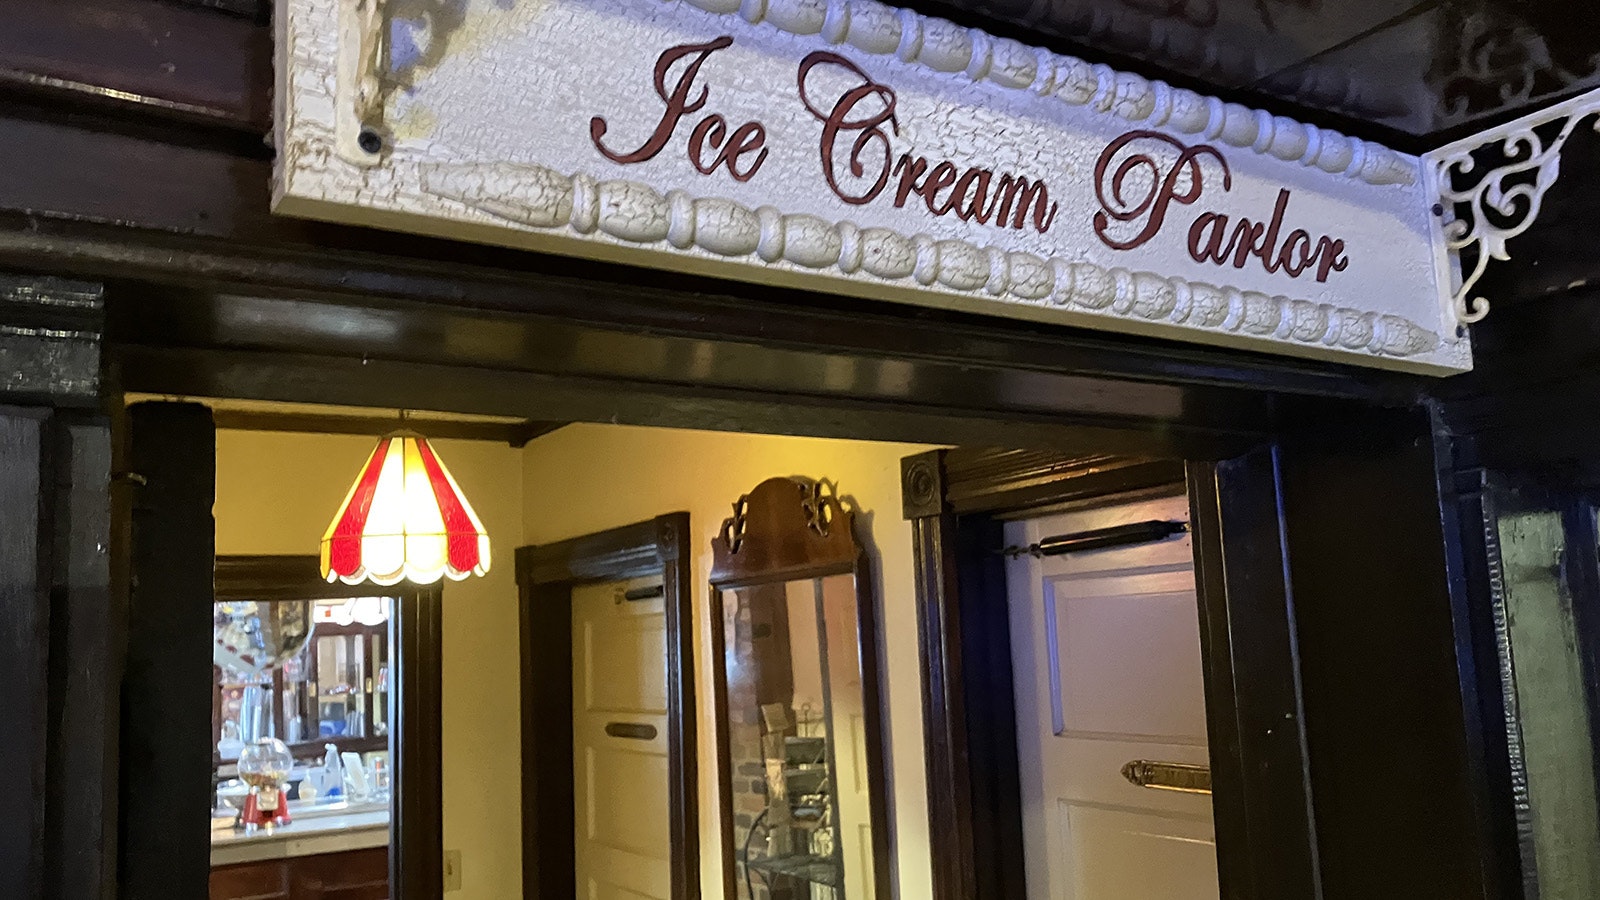 The Plains Ice Cream Parlor in Douglas offers ice cream, sundaes, shakes and more, as well as a taste of historic Douglas-area structures woven into the building.